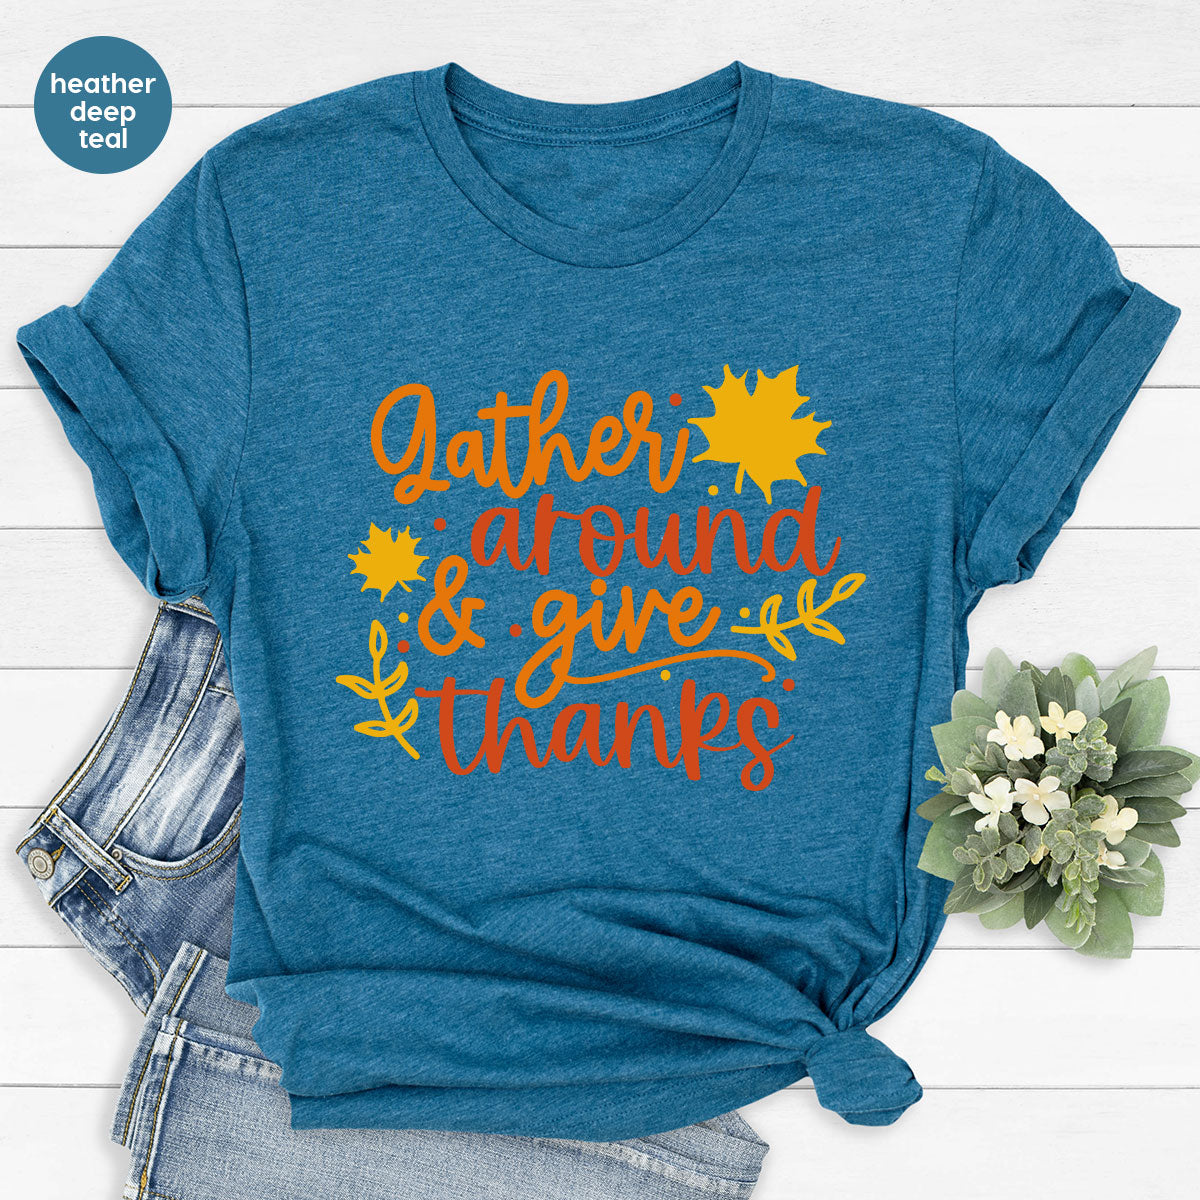 Thanksgiving Sweatshirts, Gifts for Family, Kids Fall Clothes, Leaves Graphic Tees, Autumn Toddler Outfits, Thankful Vneck TShirt